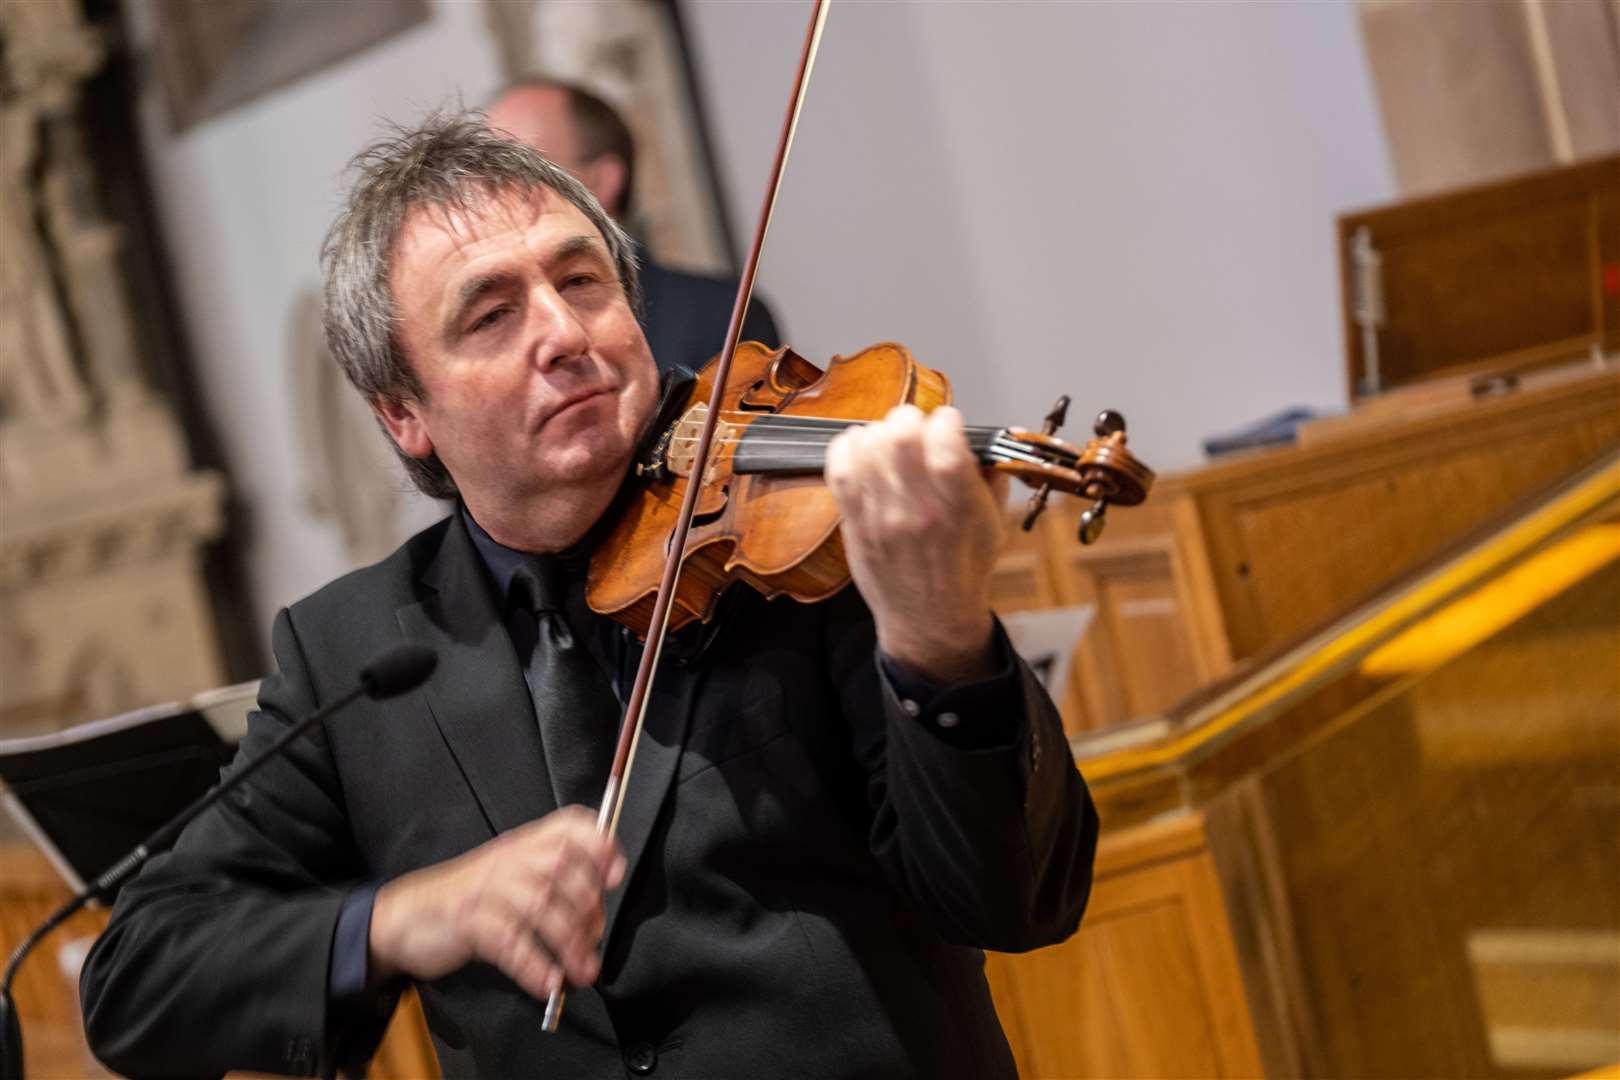 Frank Gallagher plays the violin during the service (Stephen Latimer/PA)